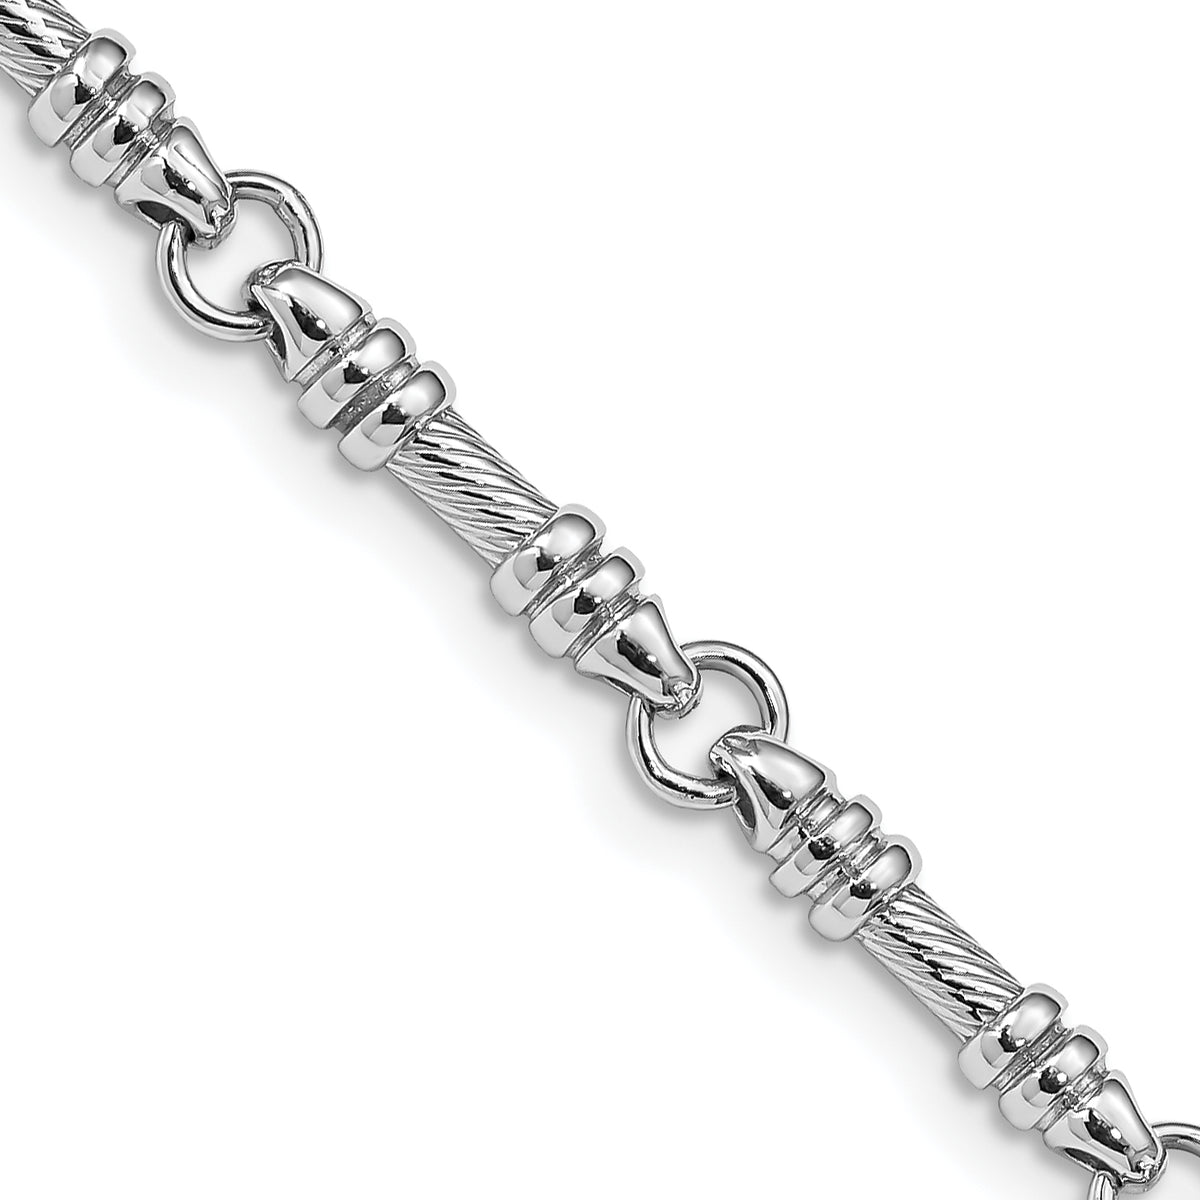 14K White Gold 8 inch 3.5mm Hand Polished and Textured Fancy Link with Fancy Lobster Clasp Bracelet